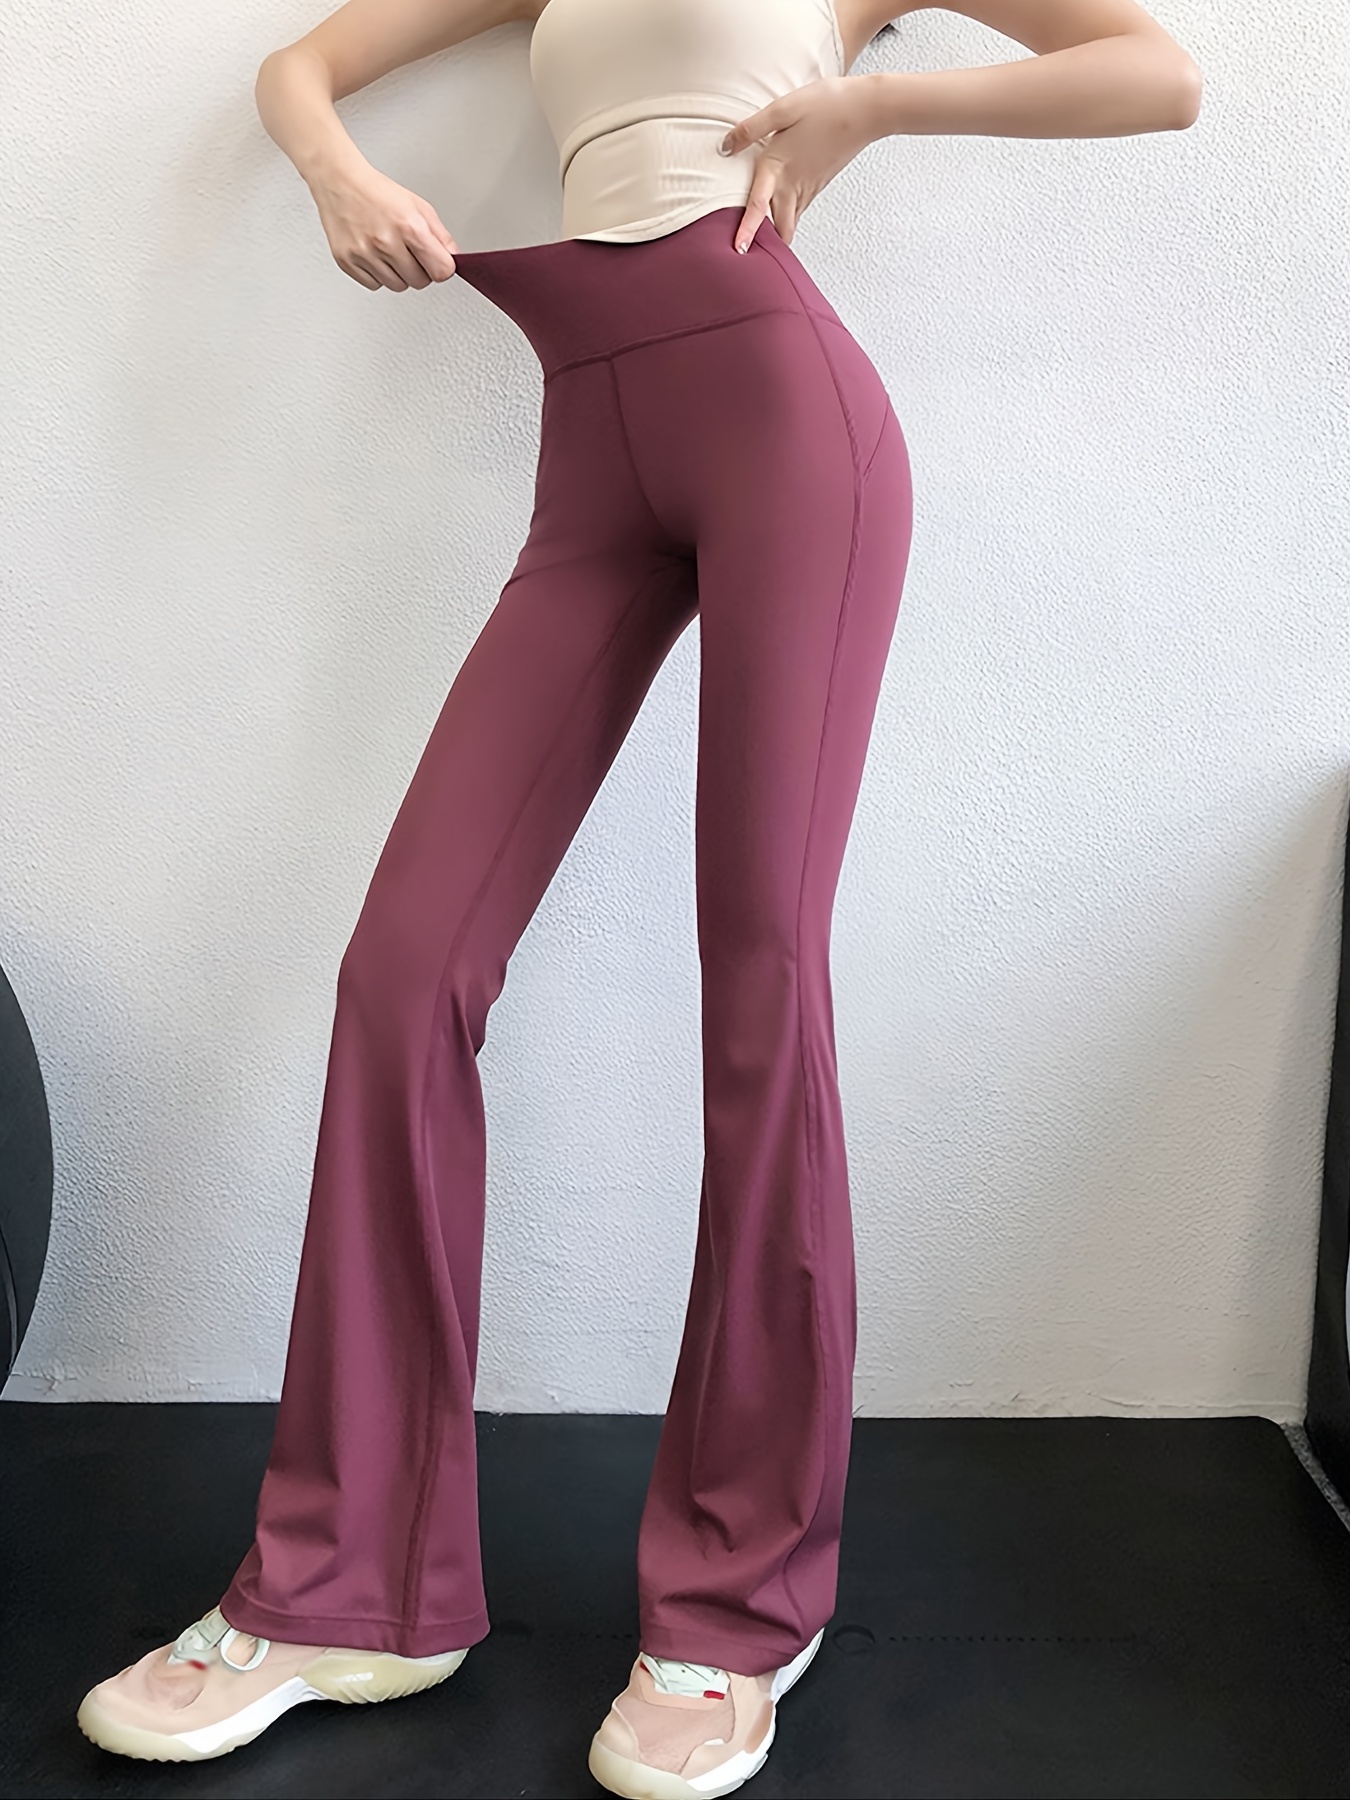 High-Rise Semi-Fitted Wide-Leg Yoga Pants for Women